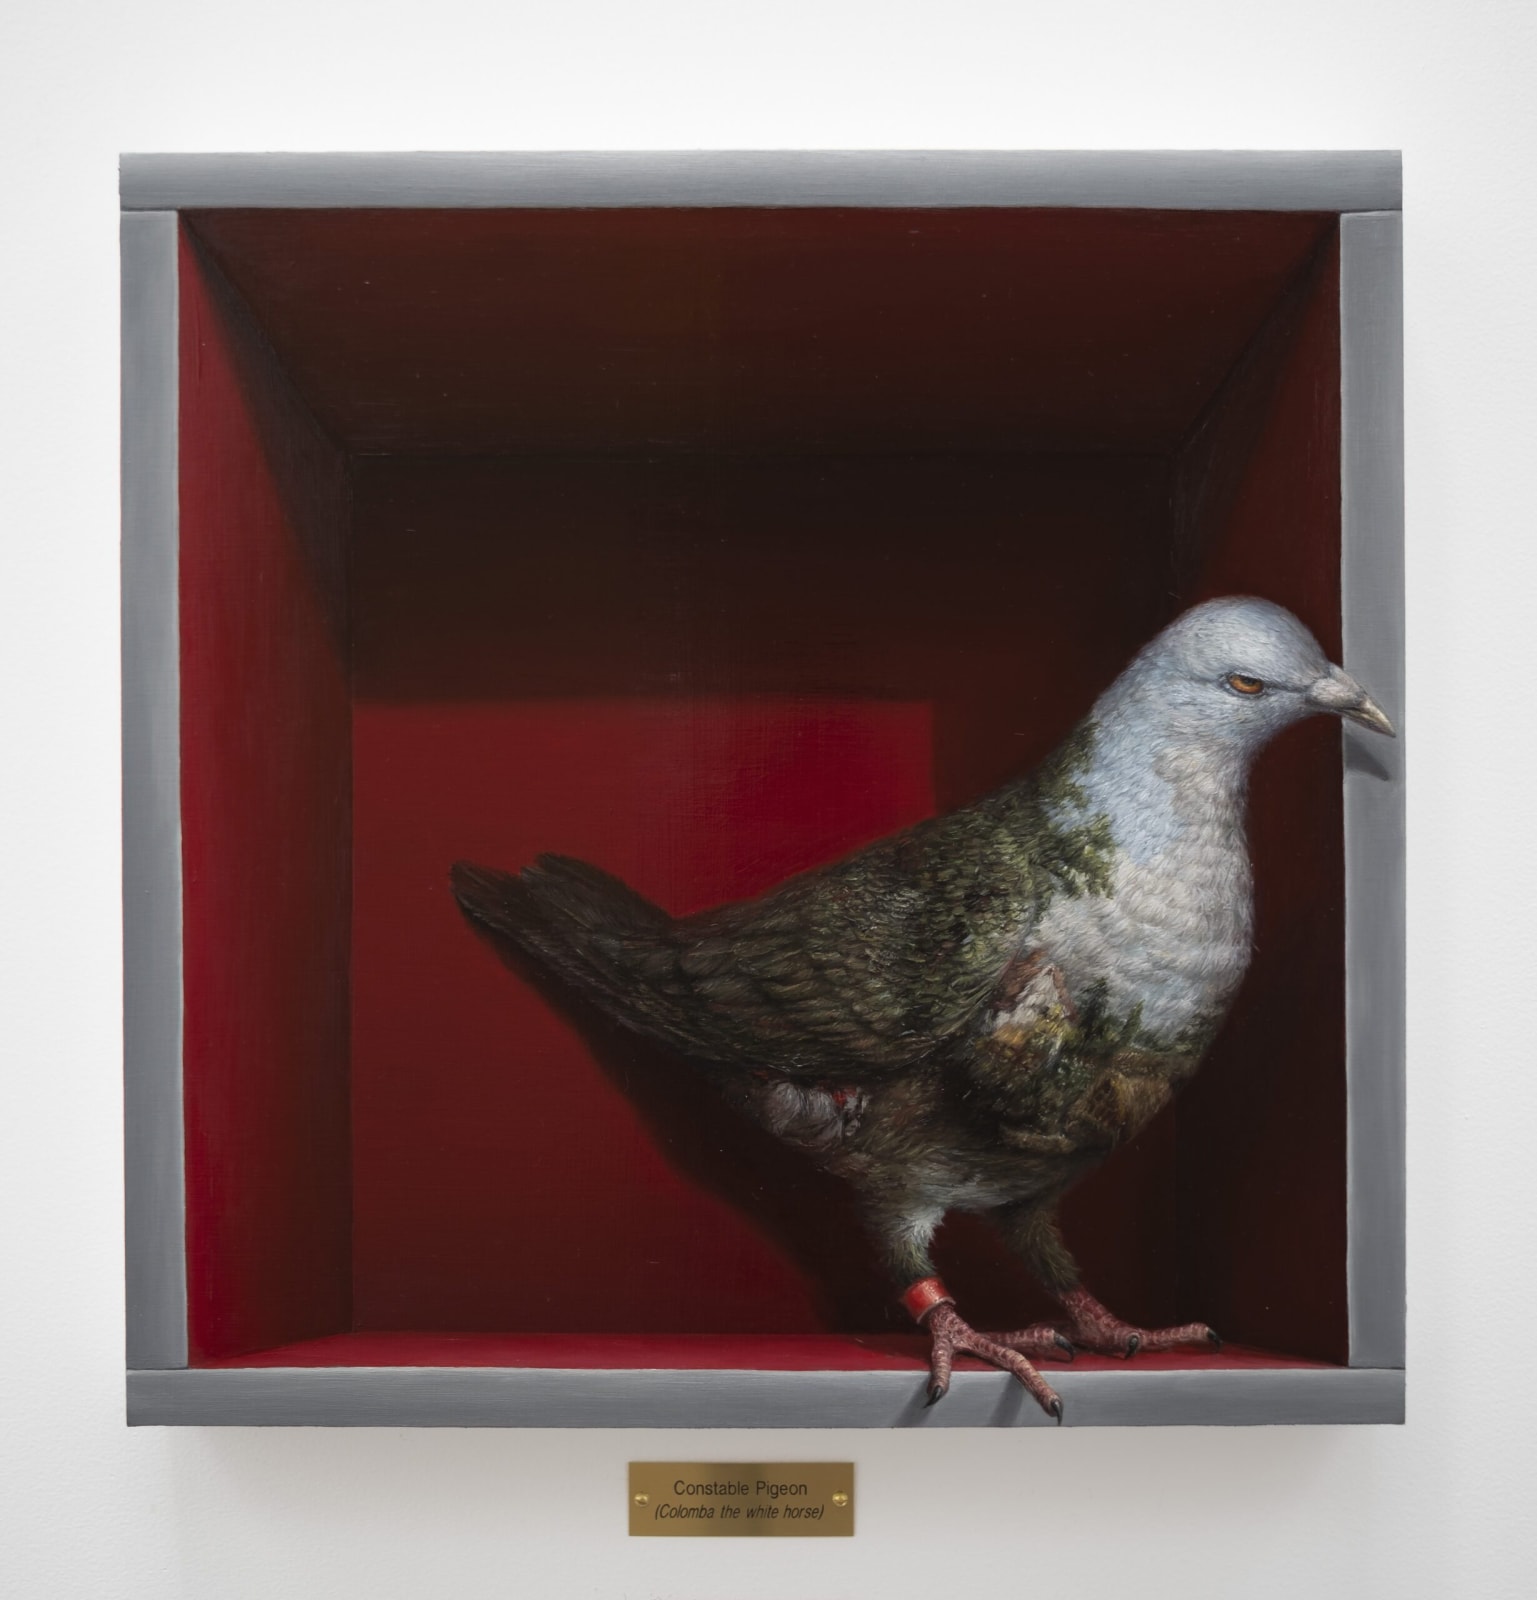 Clive Smith, Constable Pigeon (Colomba the white horse), 2022